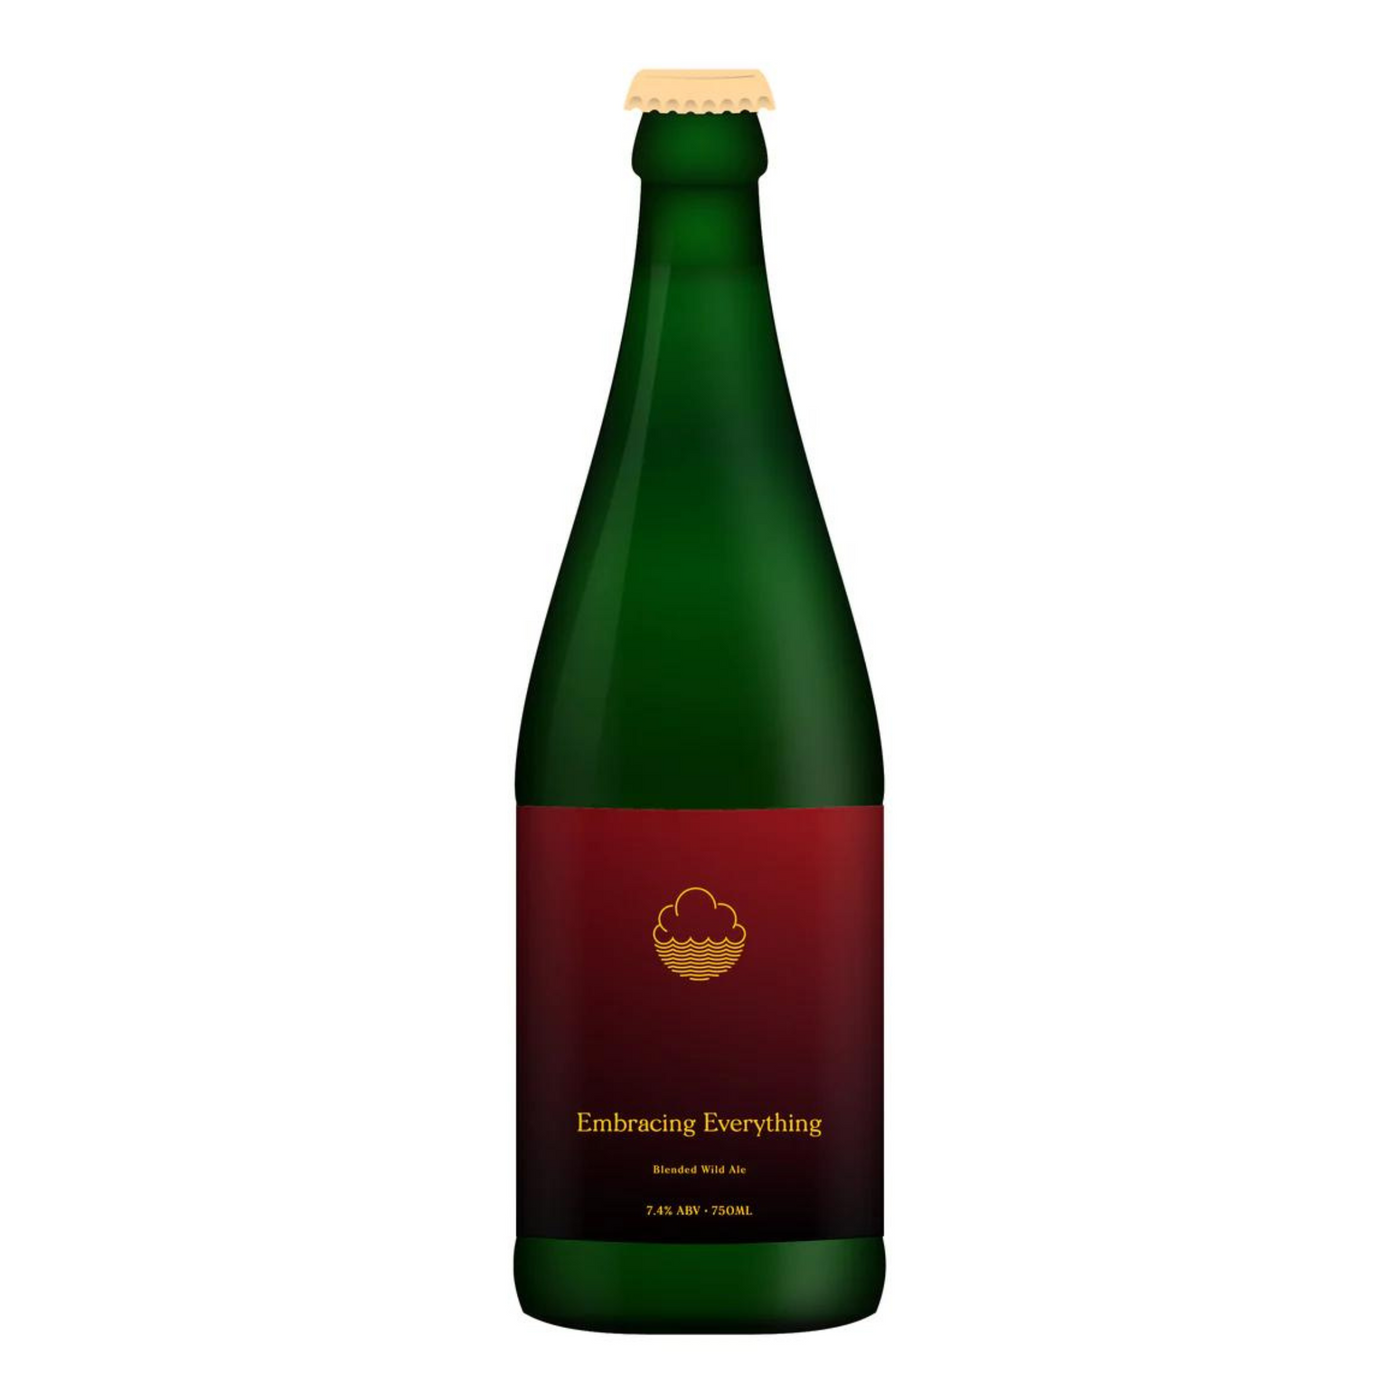 Cloudwater Embracing Everything Blended Wild Ale 750ml